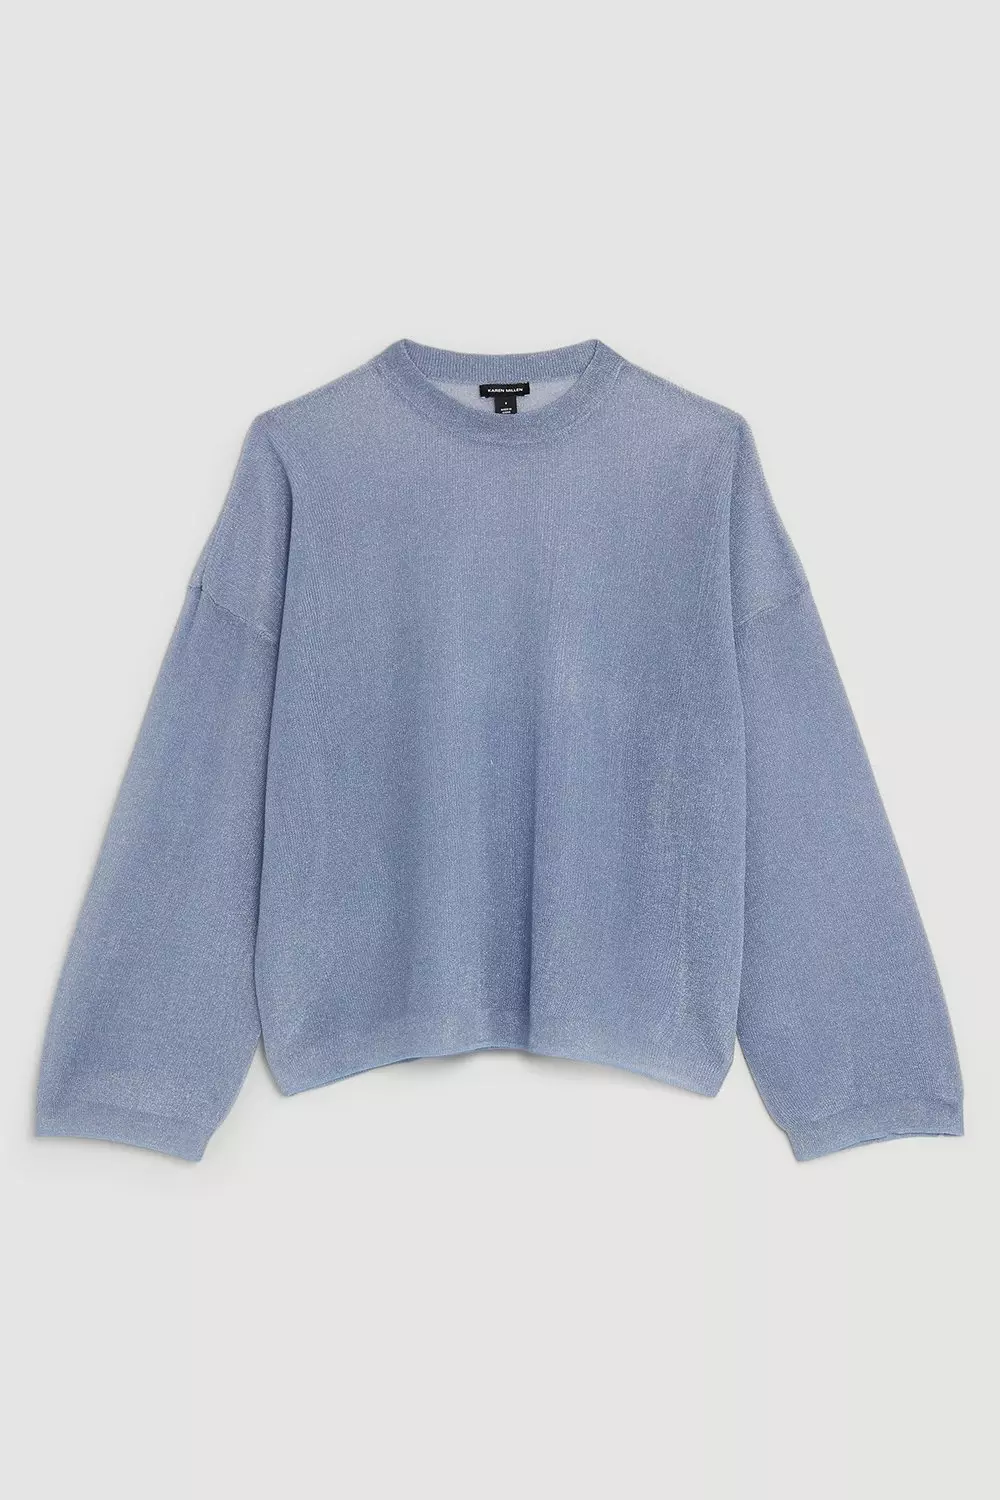 Semi-Sheer Cable-knit Cashmere Sweater